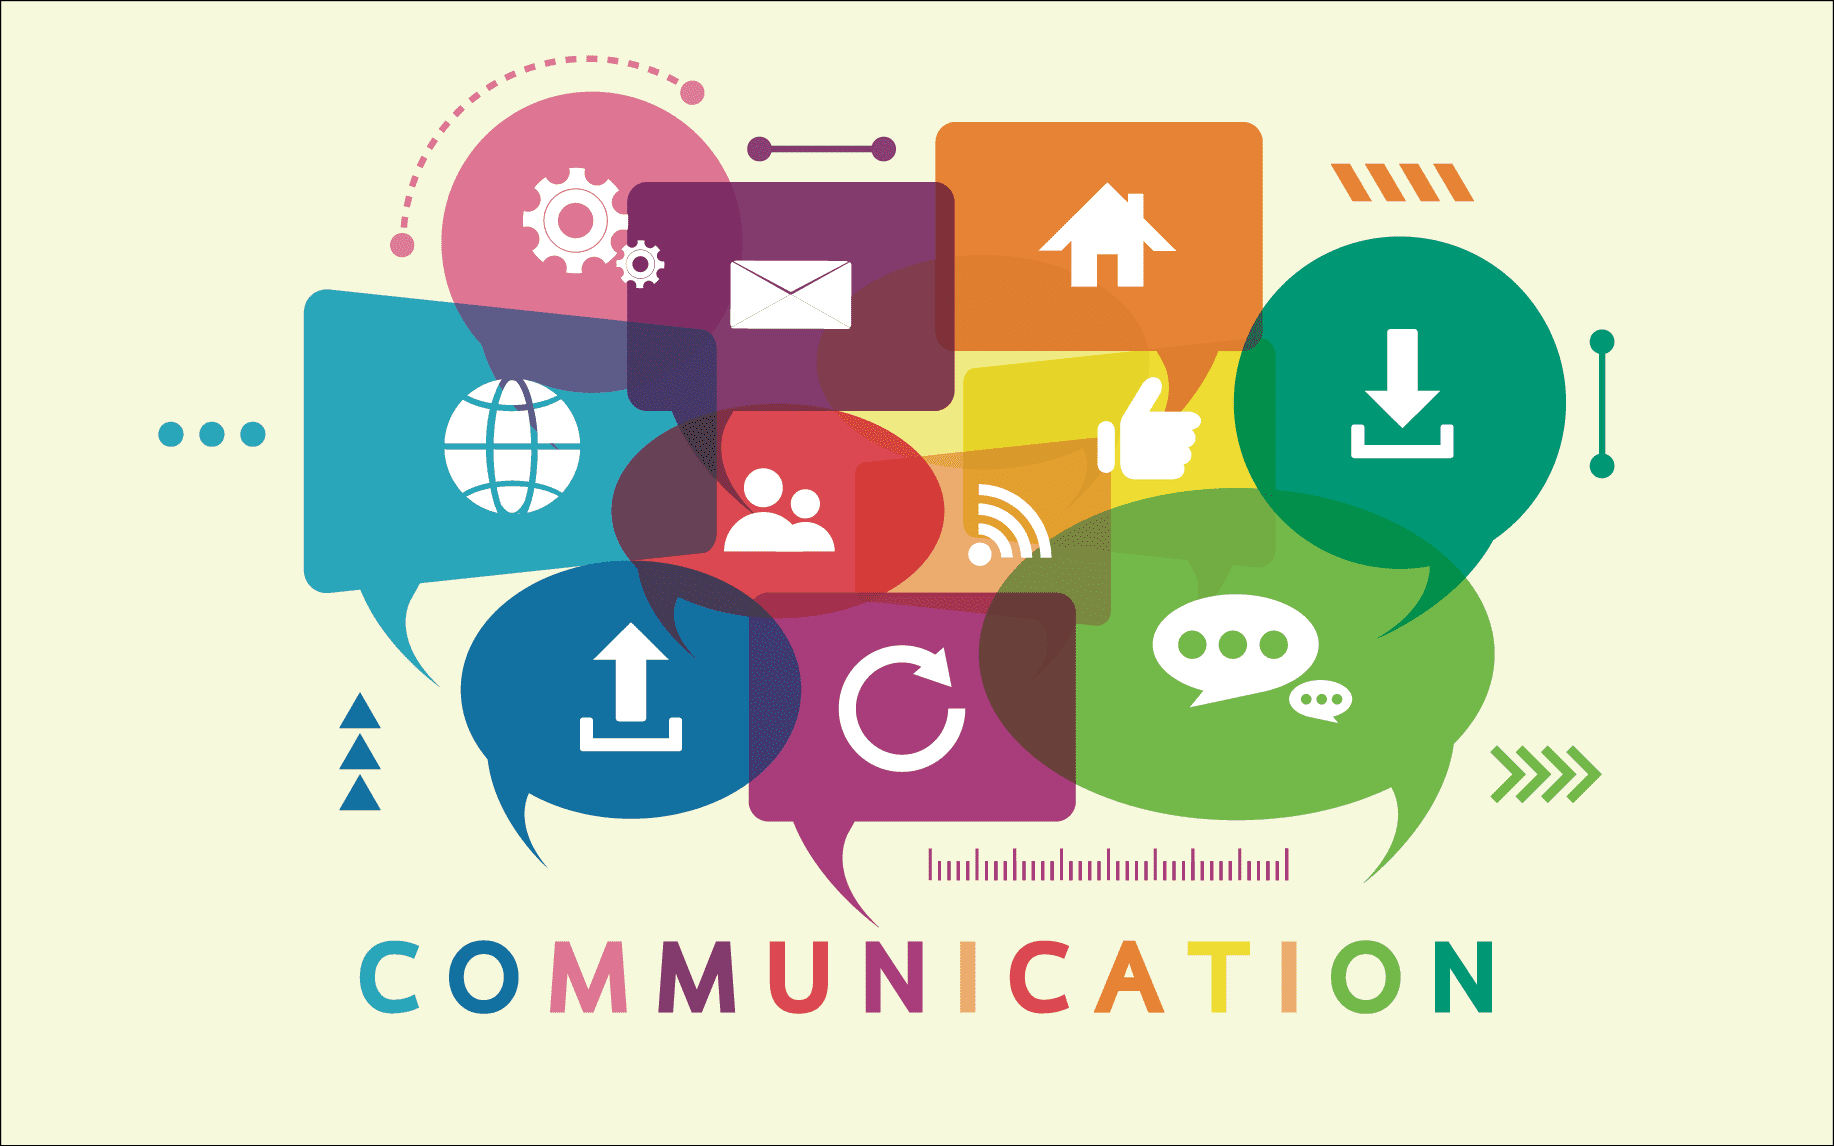 The Different Modes of Communication